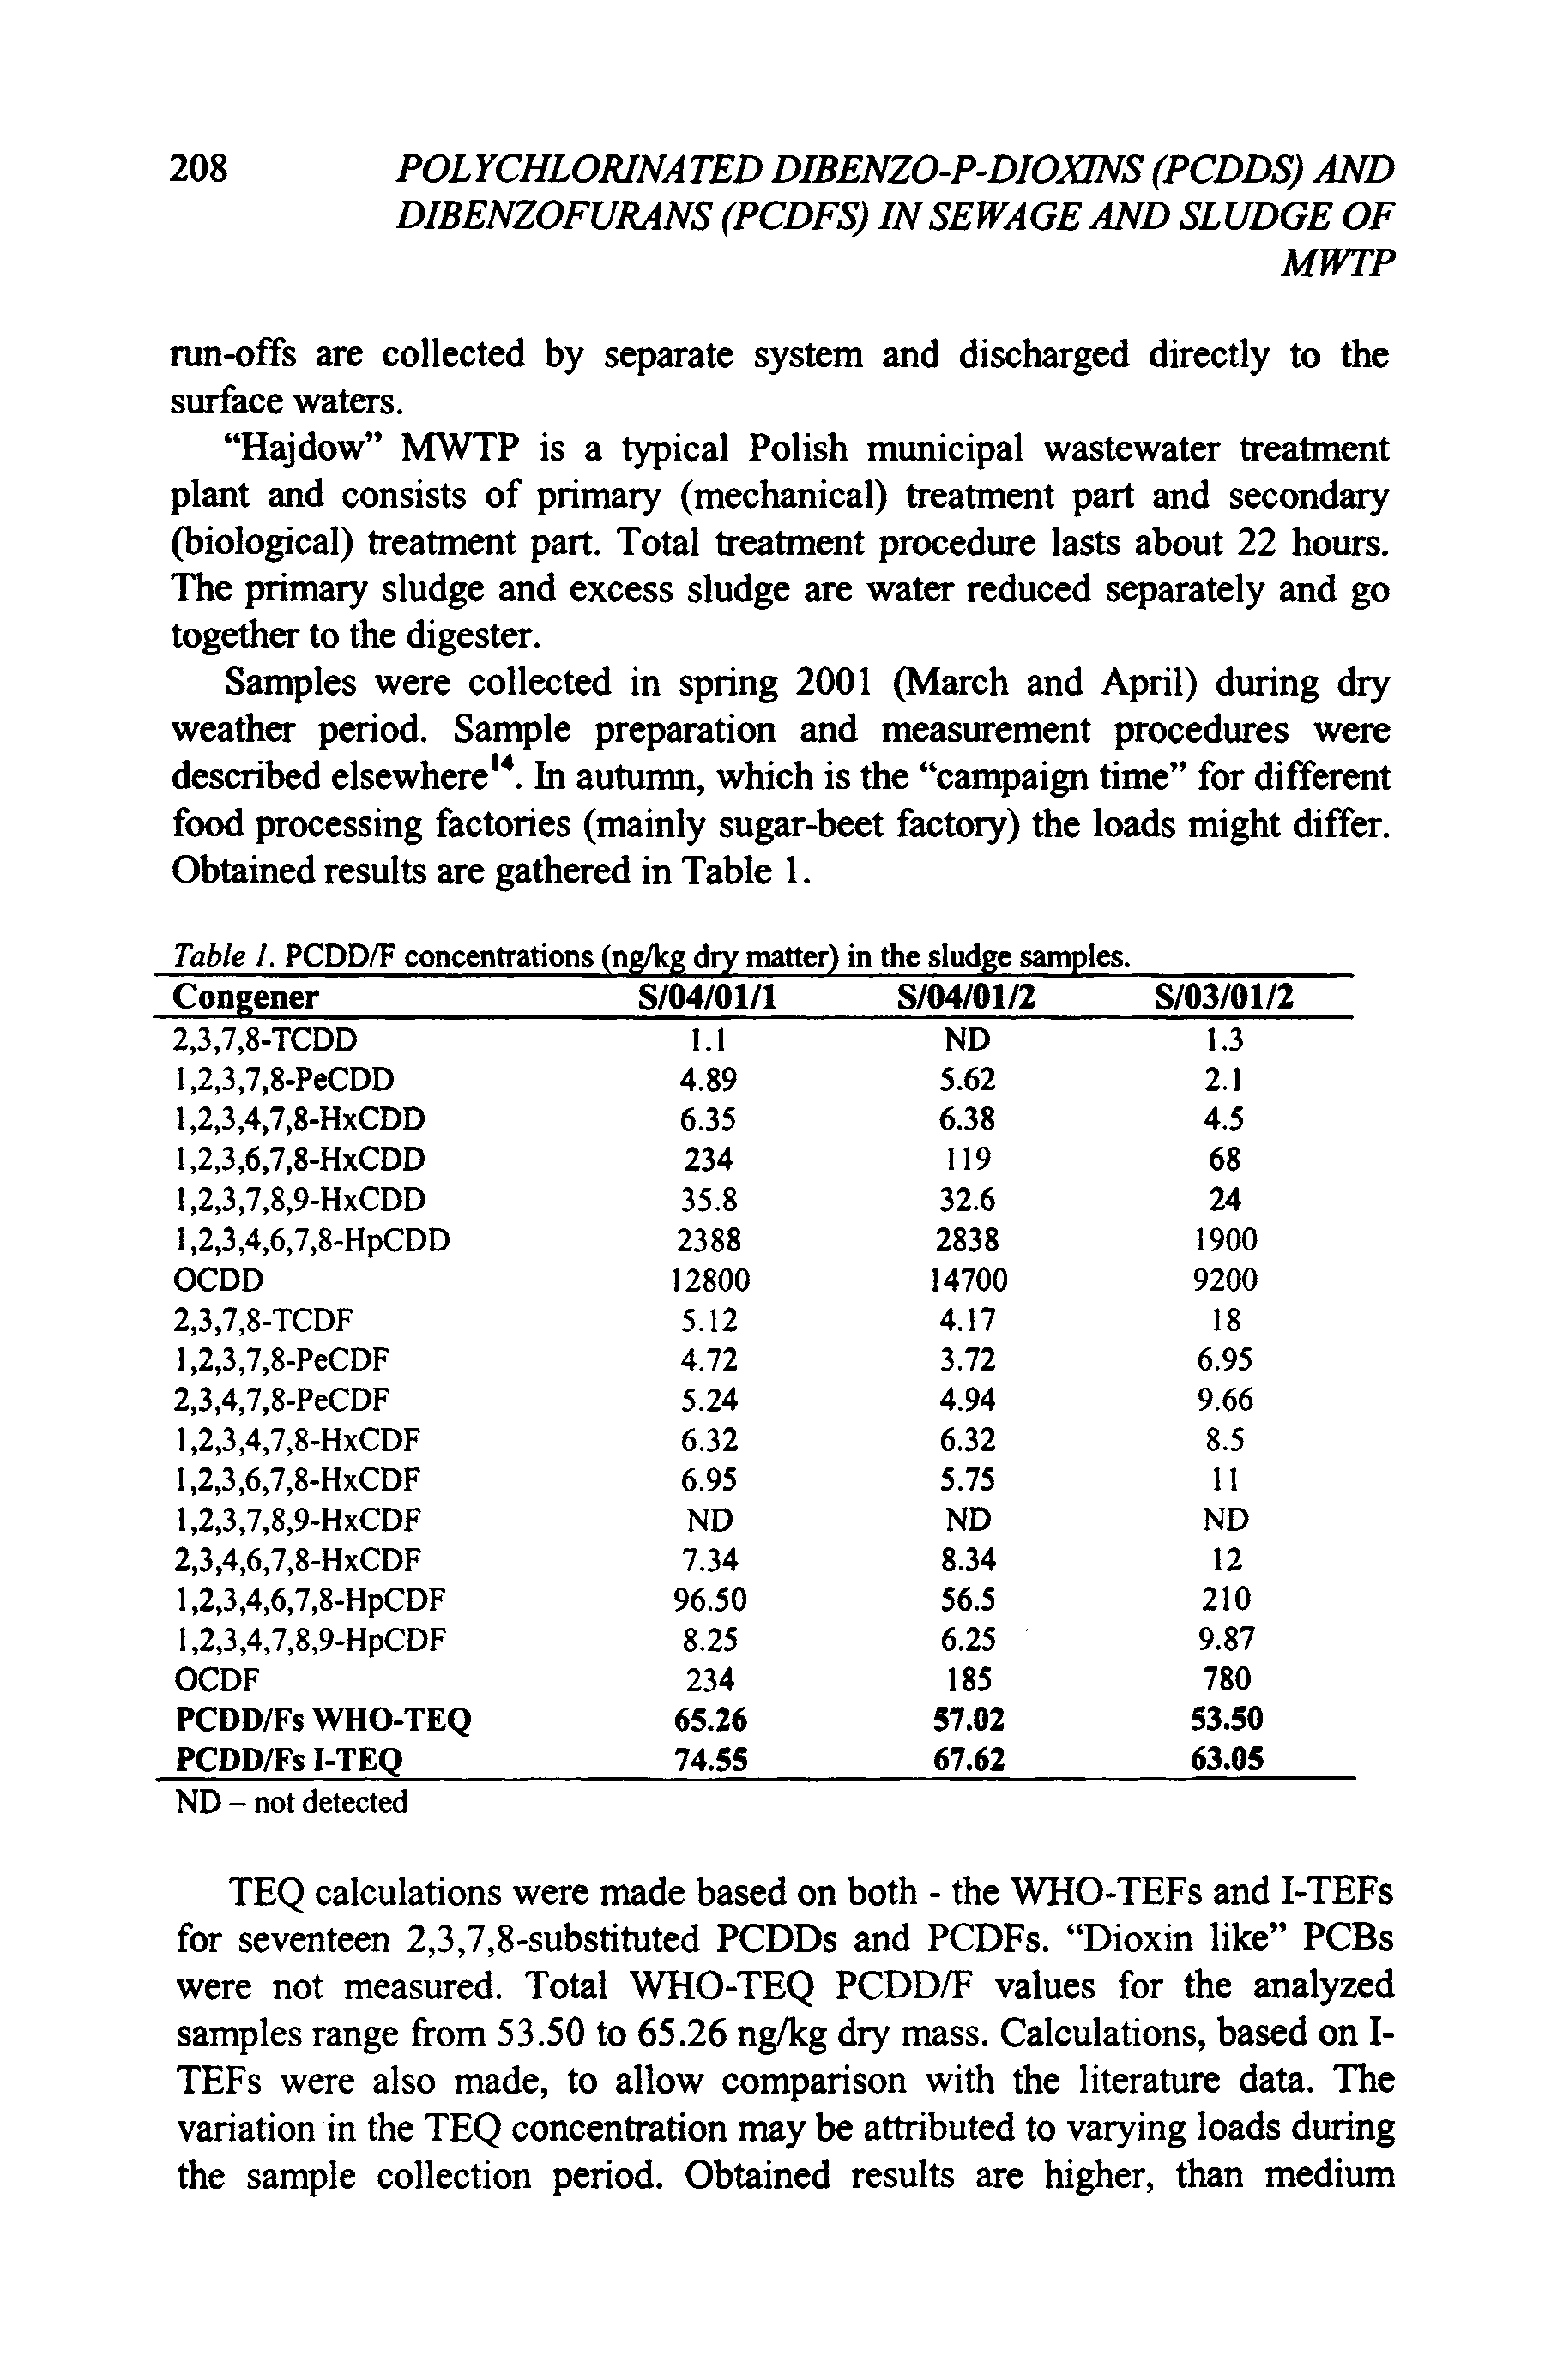 Table 1. PCDD/F concentrations (ng/kg dry matter) in the sludge samples.